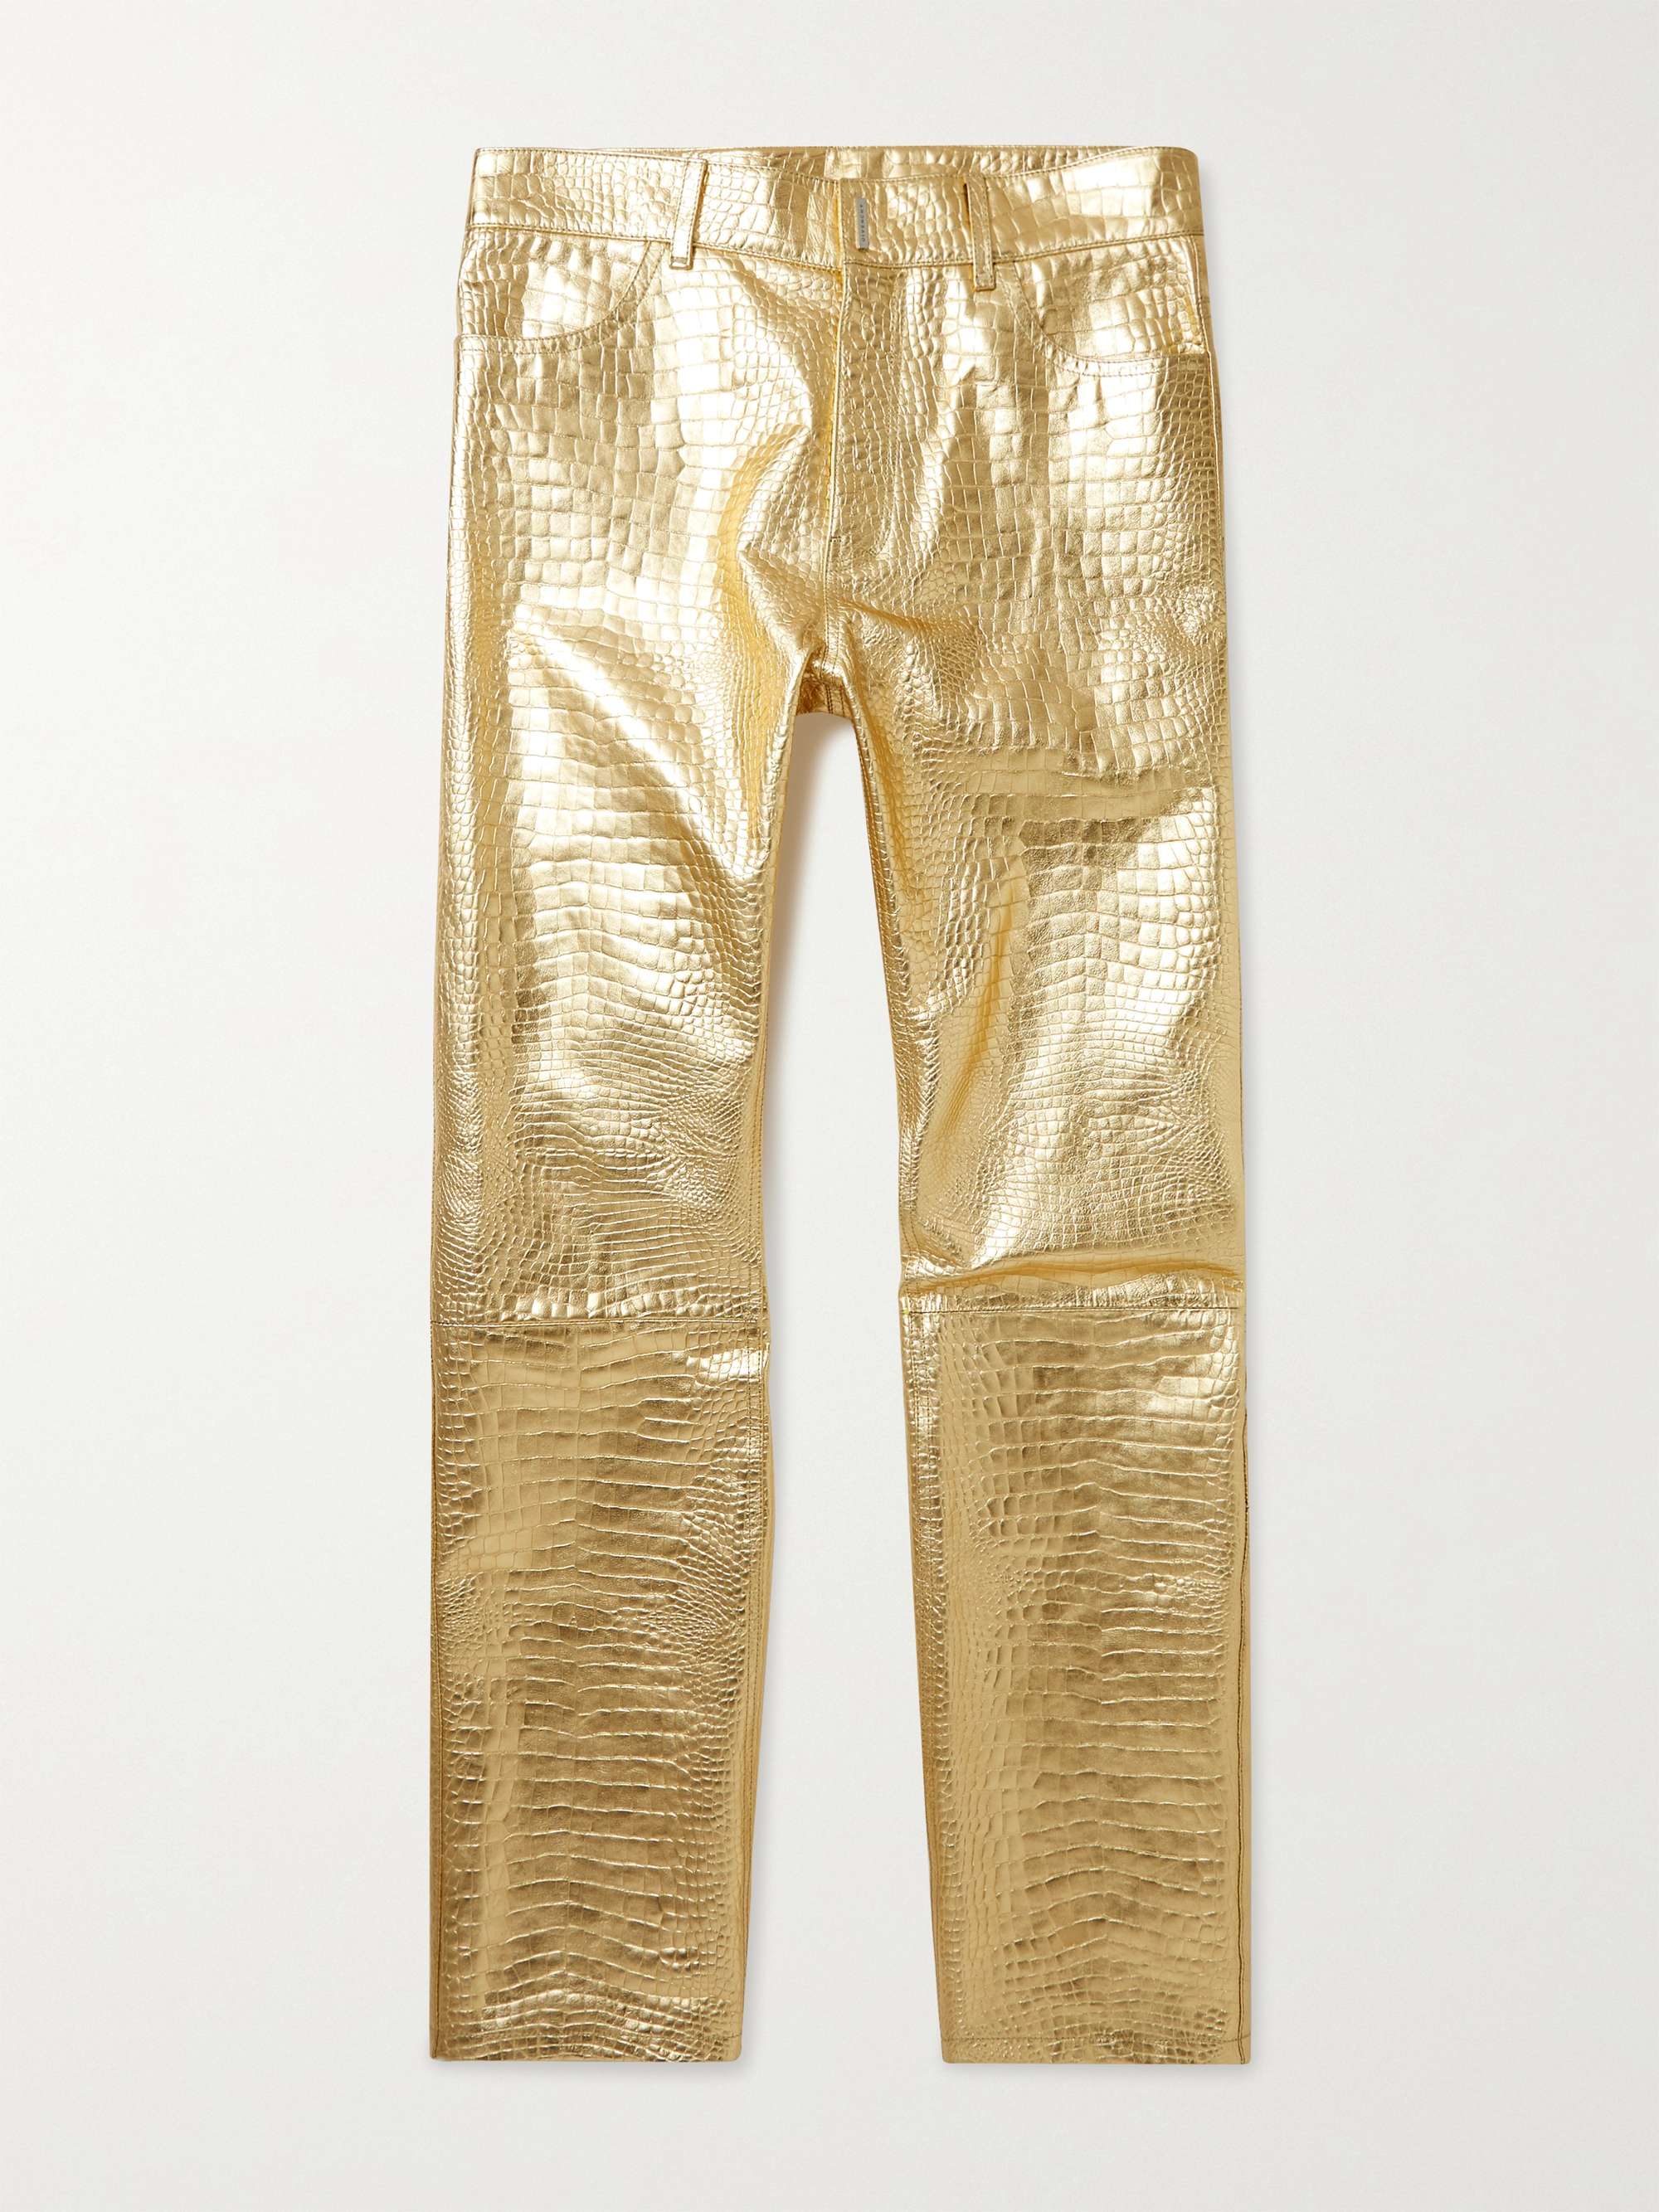 GIVENCHY Croc-Effect Metallic Leather Trousers